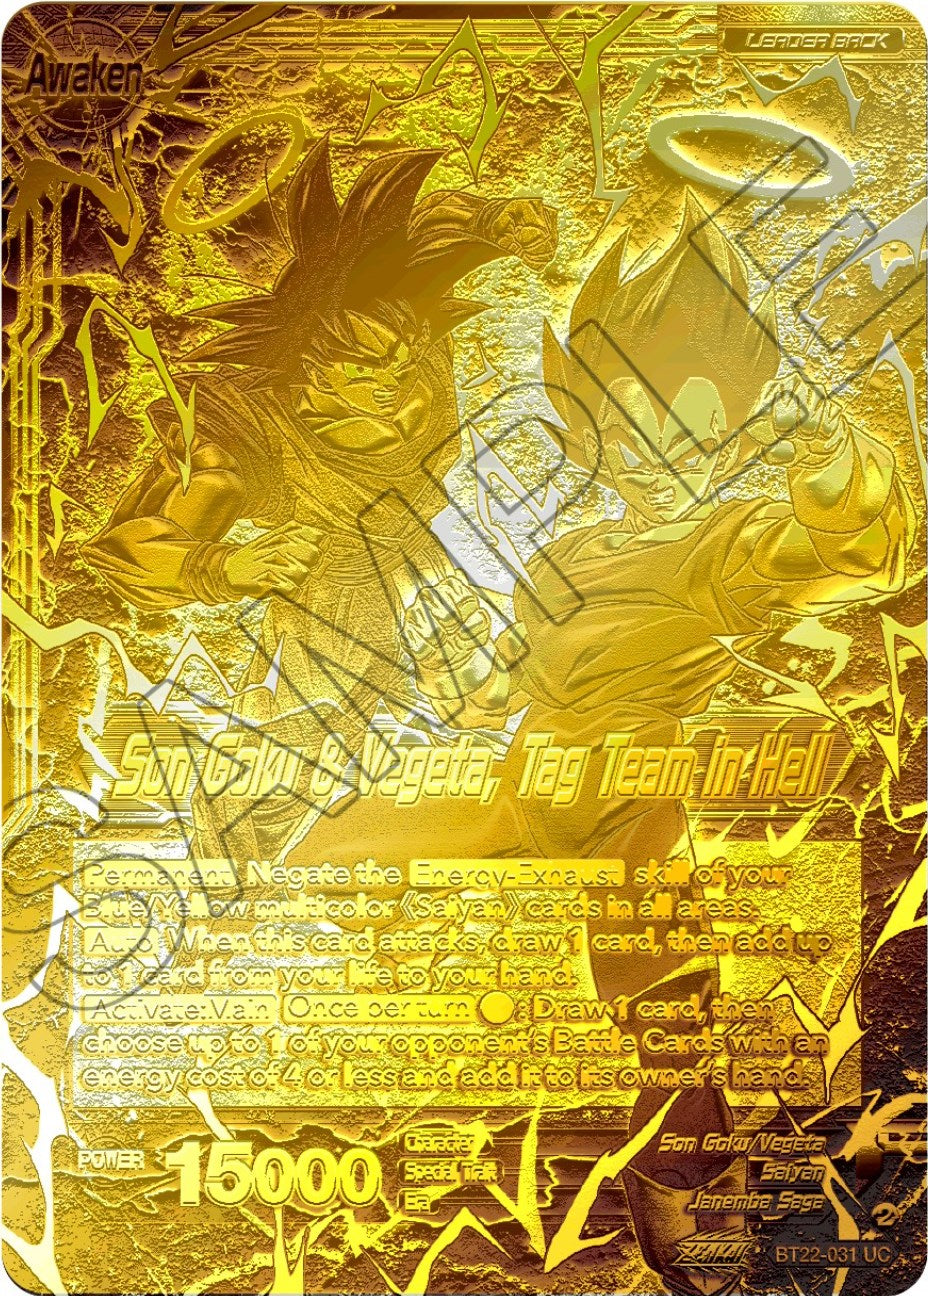 Son Goku // Son Goku & Vegeta, Tag Team in Hell (2023 Championship Finals) (Gold Metal Foil) (BT22-031) [Tournament Promotion Cards] | Amazing Games TCG